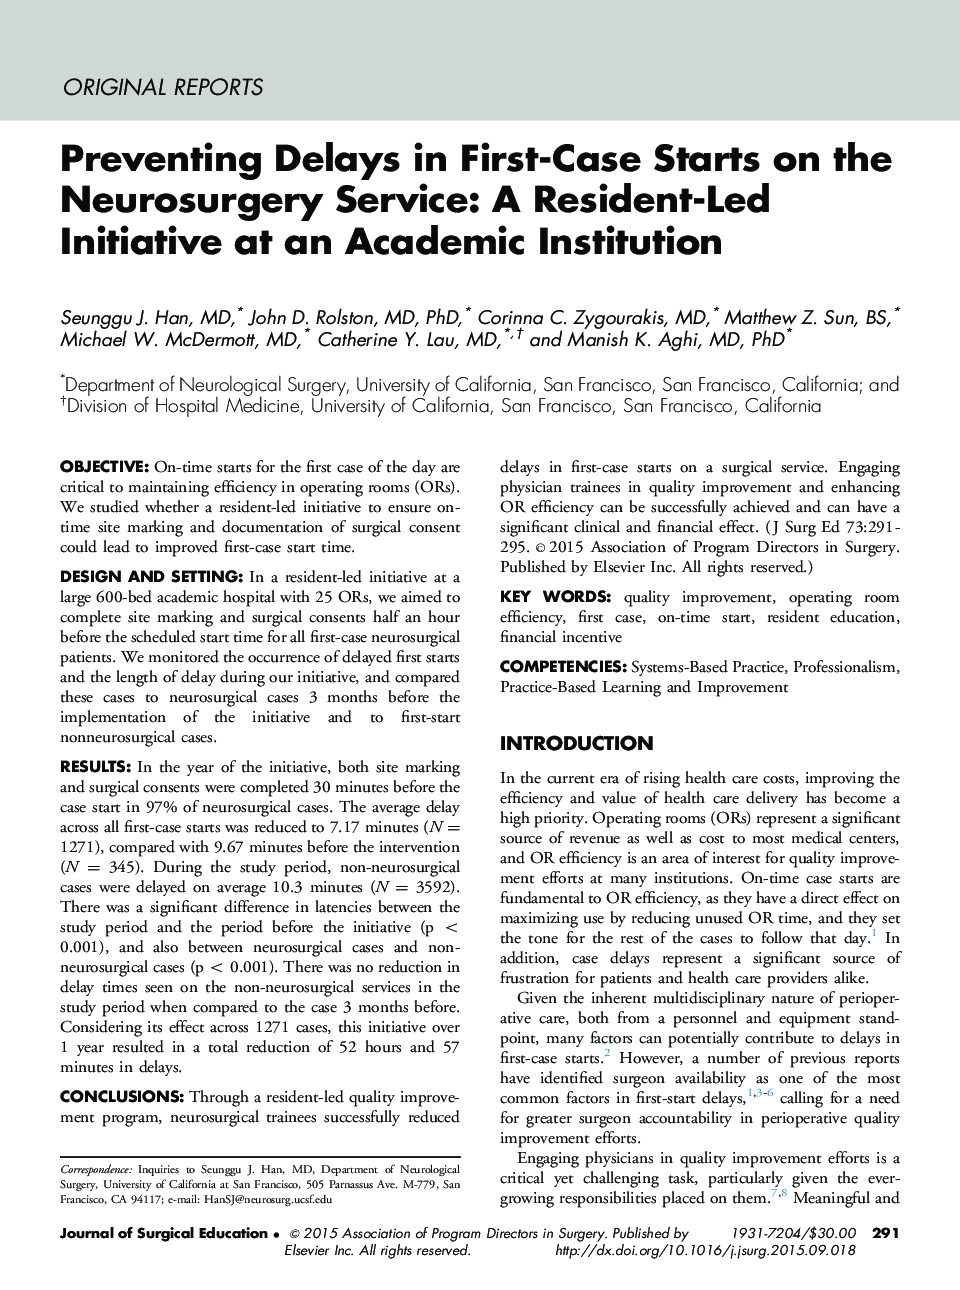 Preventing Delays in First-Case Starts on the Neurosurgery Service: A Resident-Led Initiative at an Academic Institution